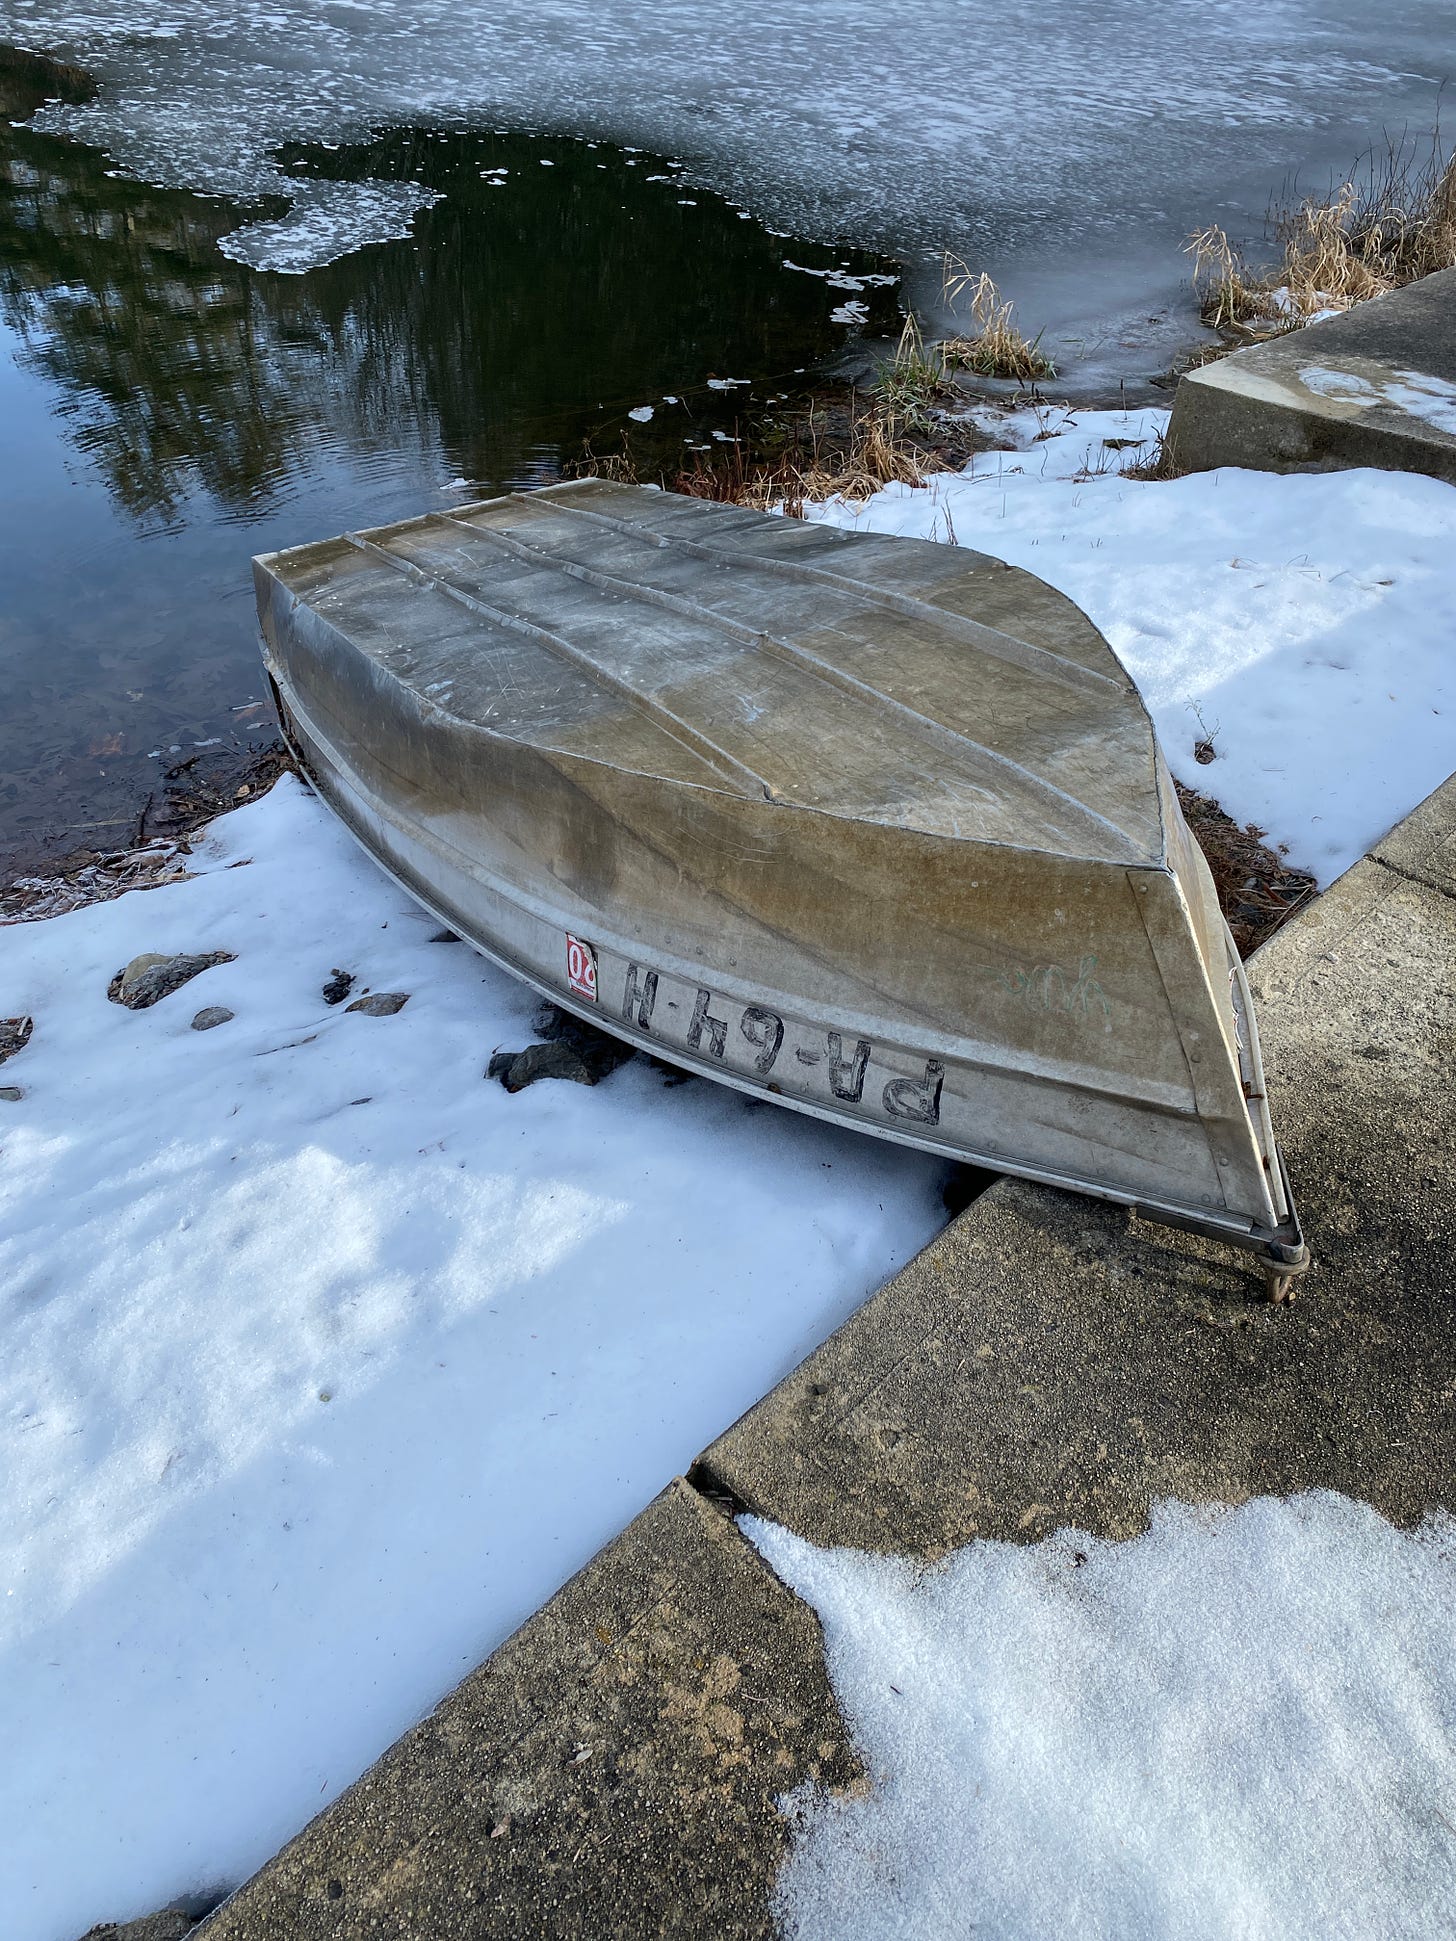 An overturned small rowboat on a snowy bank of a pond with skim ice